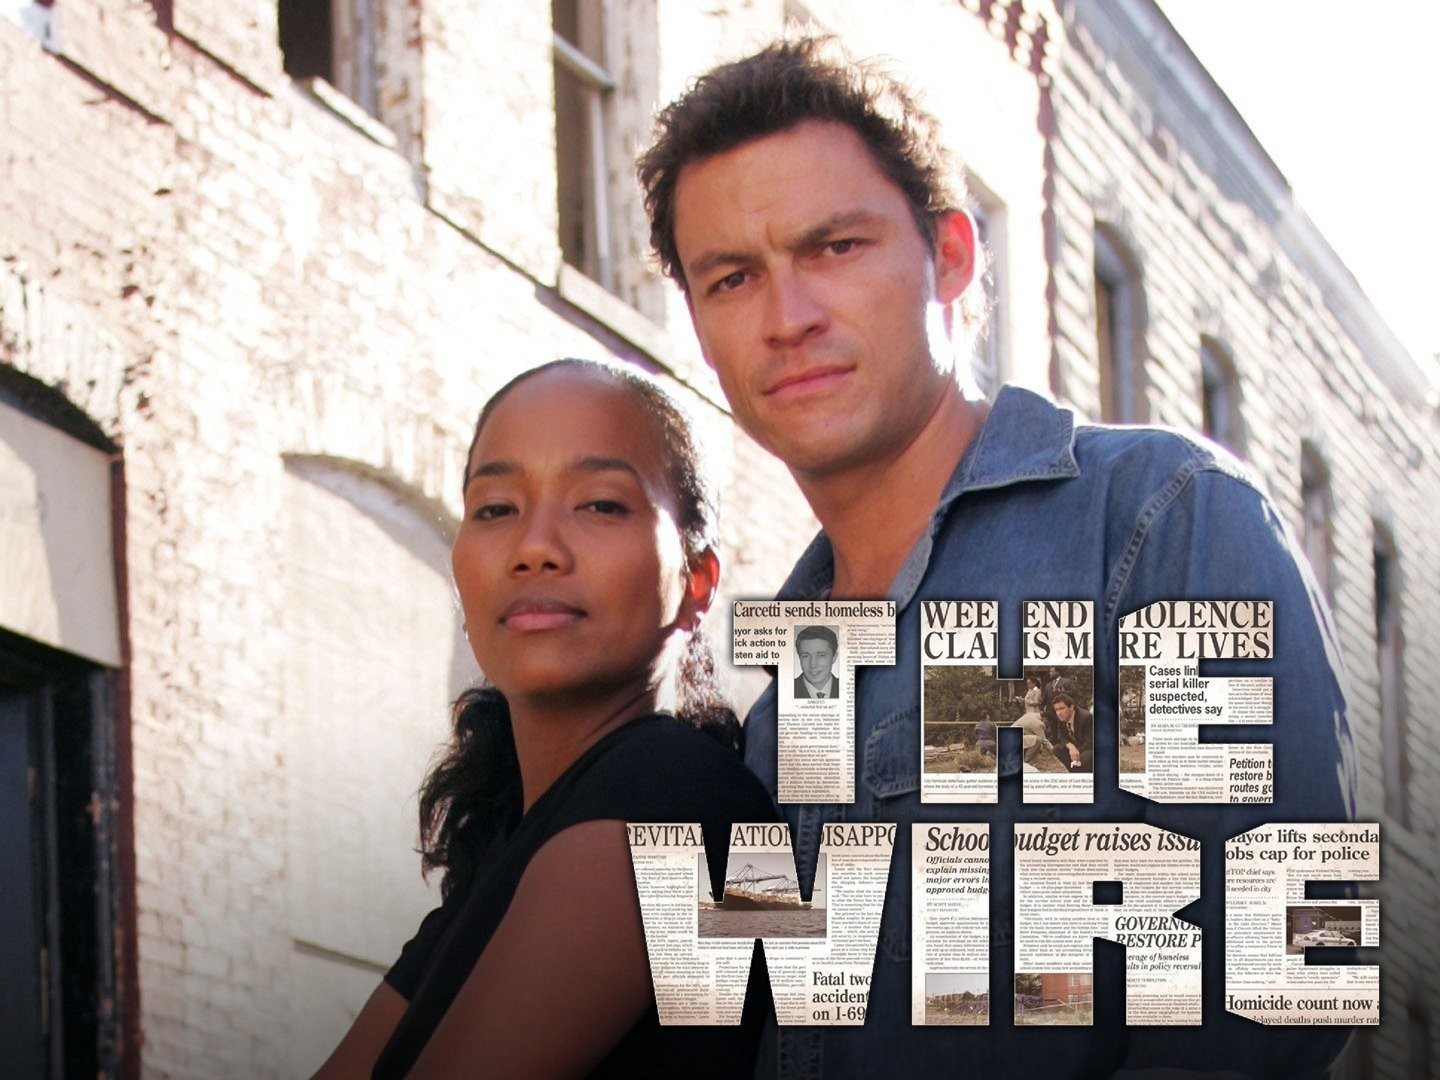 The Best TV Show Ever!': A Millennial Reviews 'The Wire